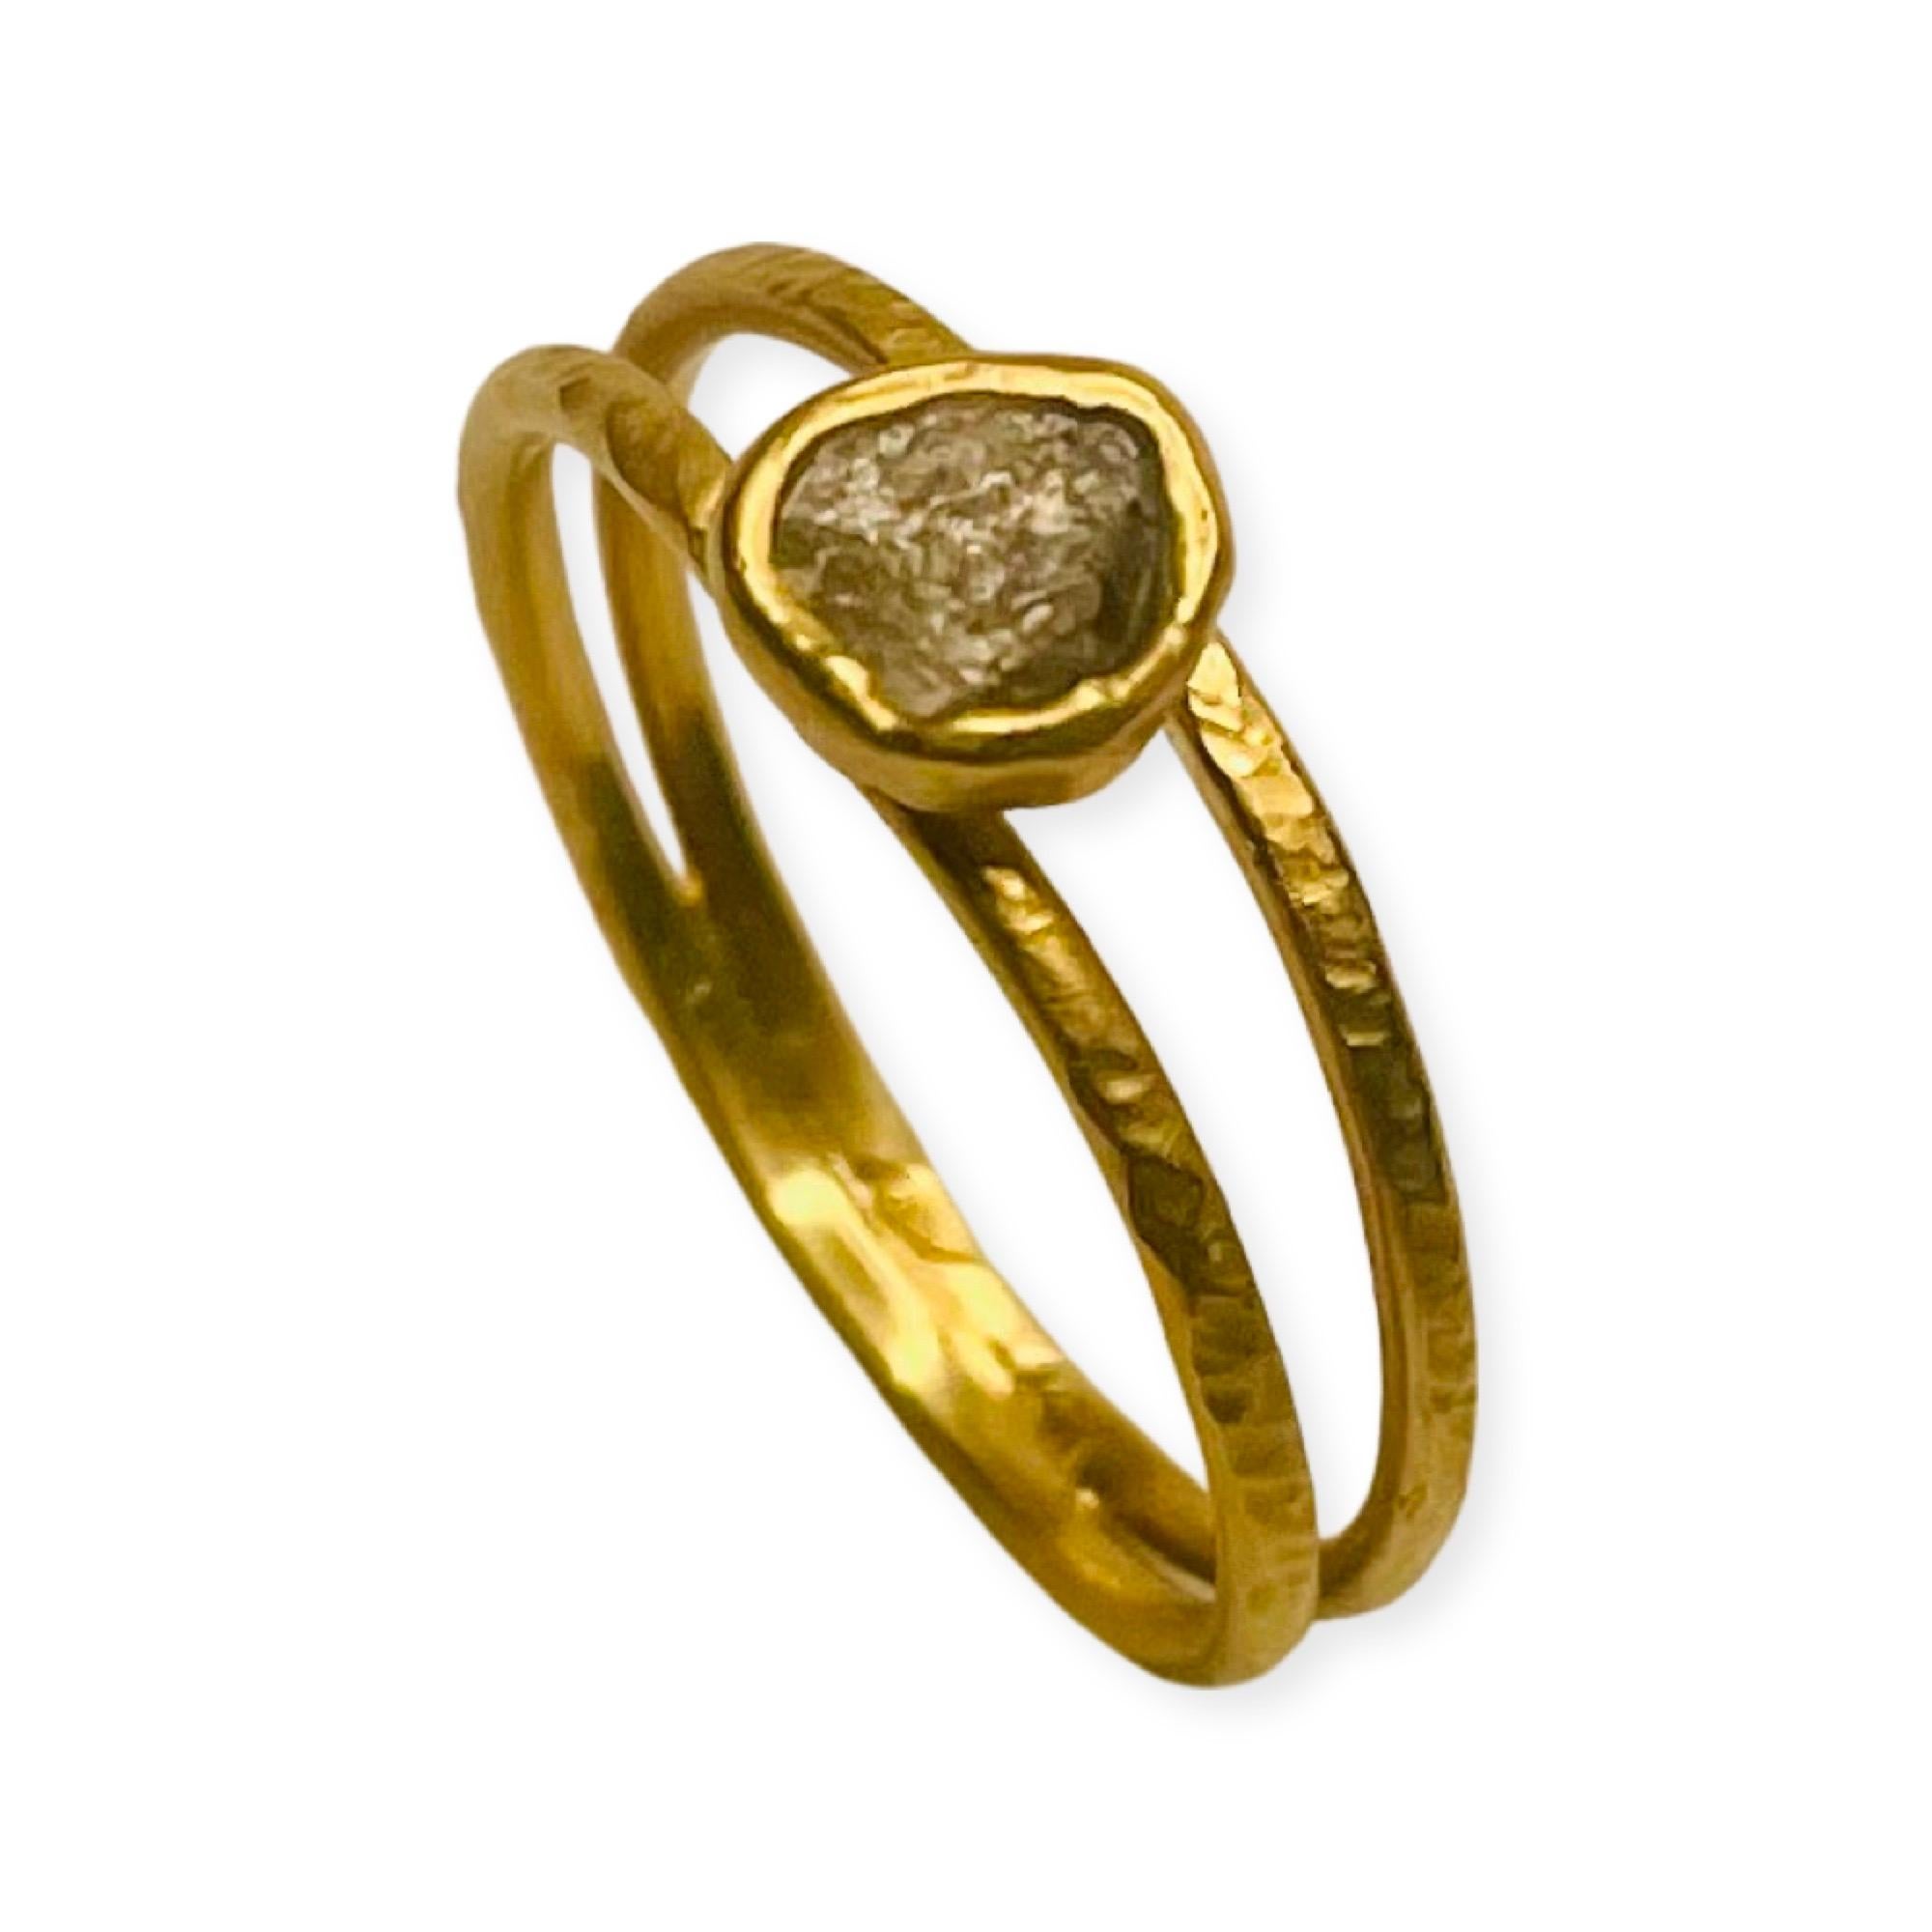 This is an 18KY gold, double banded, sapphire ring.  It is hand fabricated. The natural sapphire is a rough stone mined in Phillipsburg, MT at Gem Mountain. It is untreated. The top bezel measures 4.48 mm x 2.22 mm. The sapphire weighs 0.64cts. The